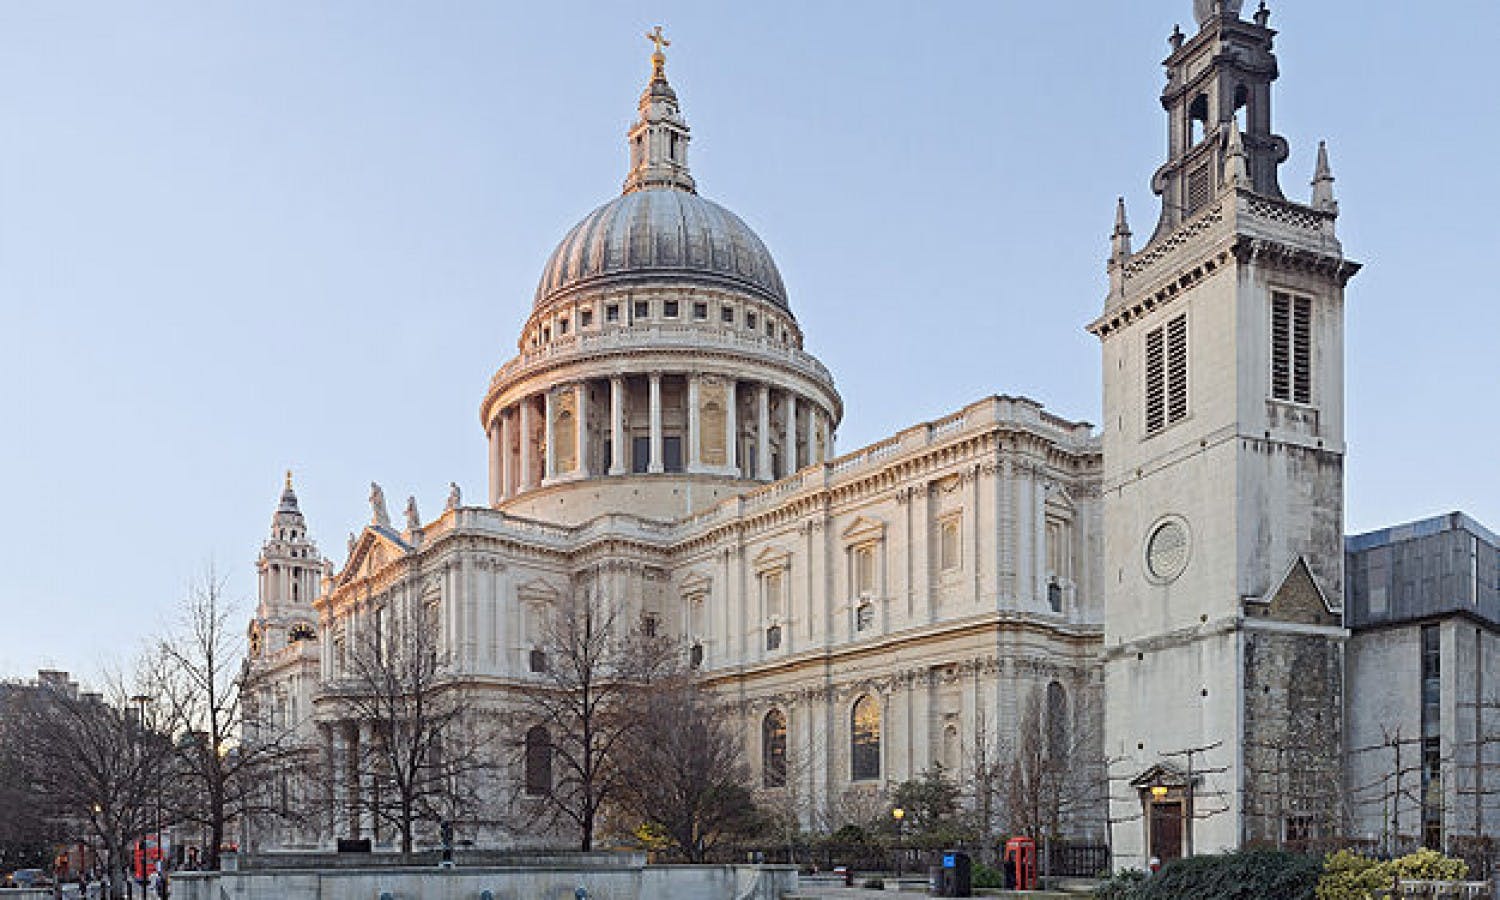 London Bus Tour with Tower of London, St. Paul's Cathedral, and River Cruise